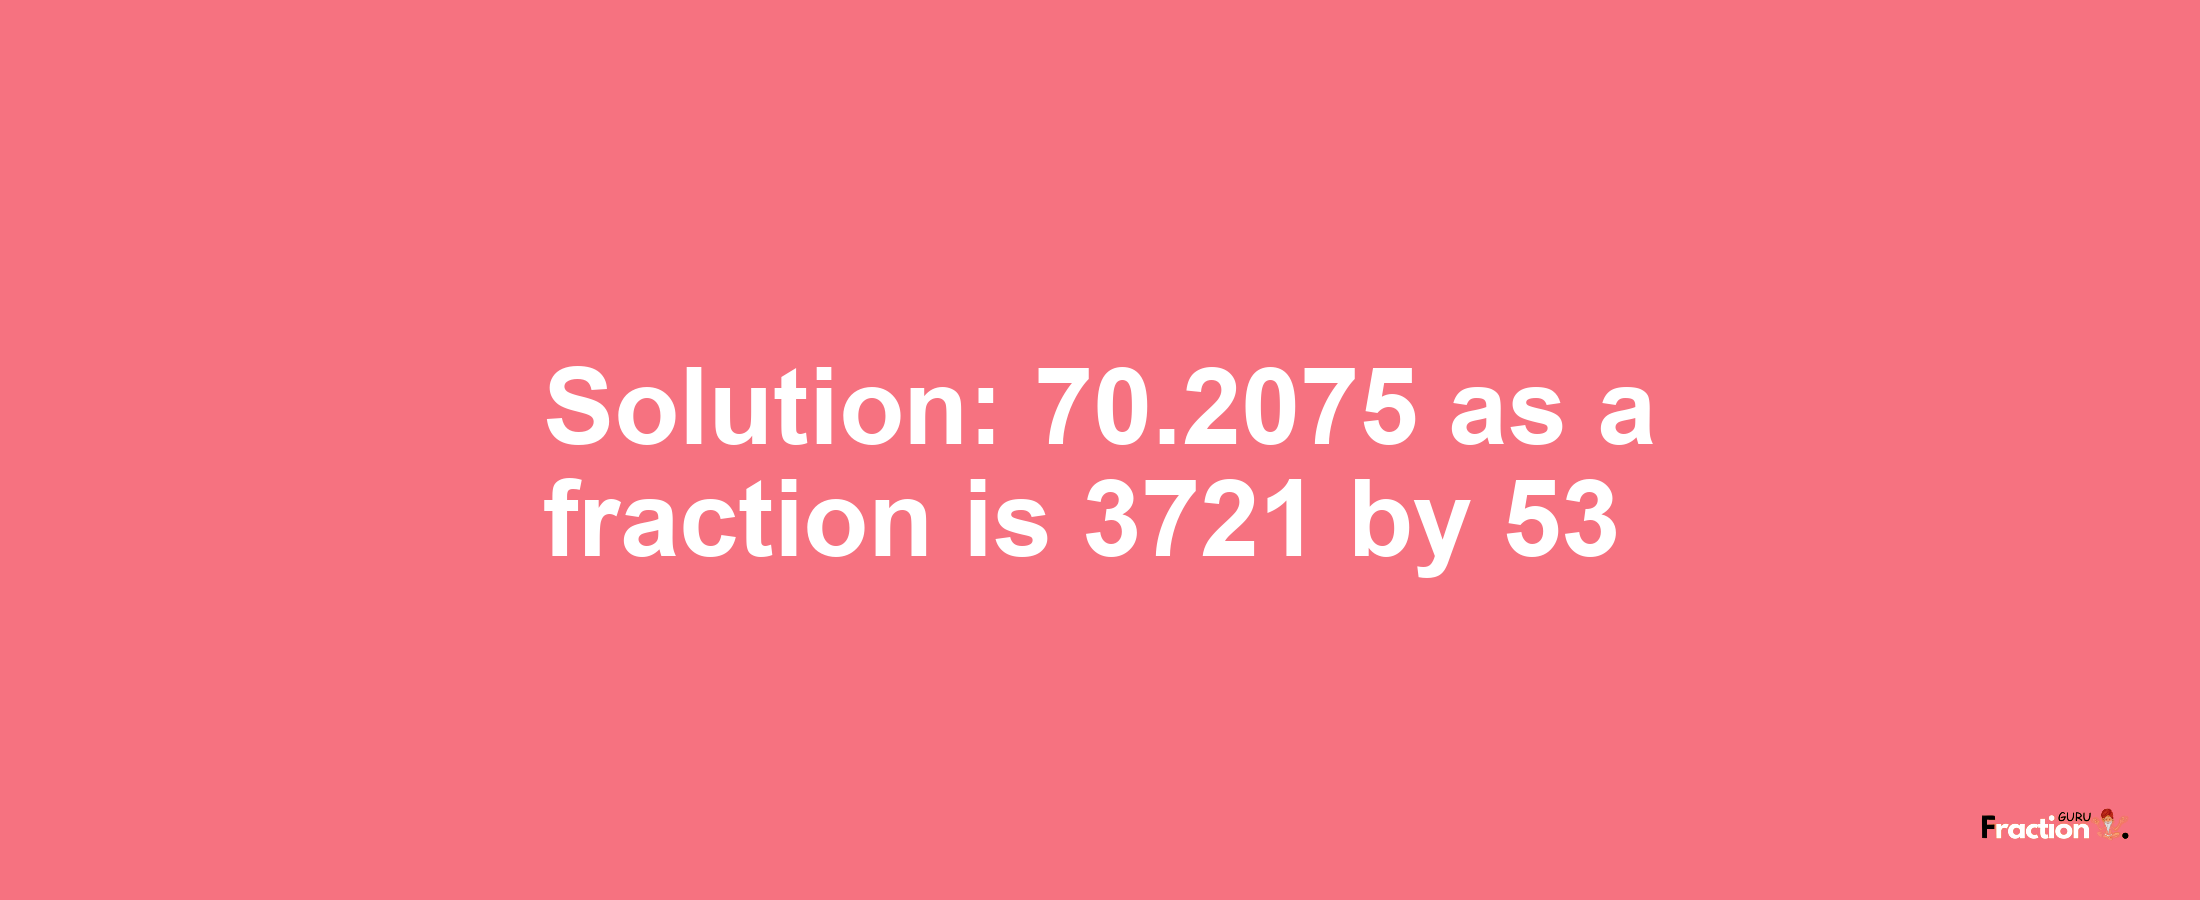 Solution:70.2075 as a fraction is 3721/53